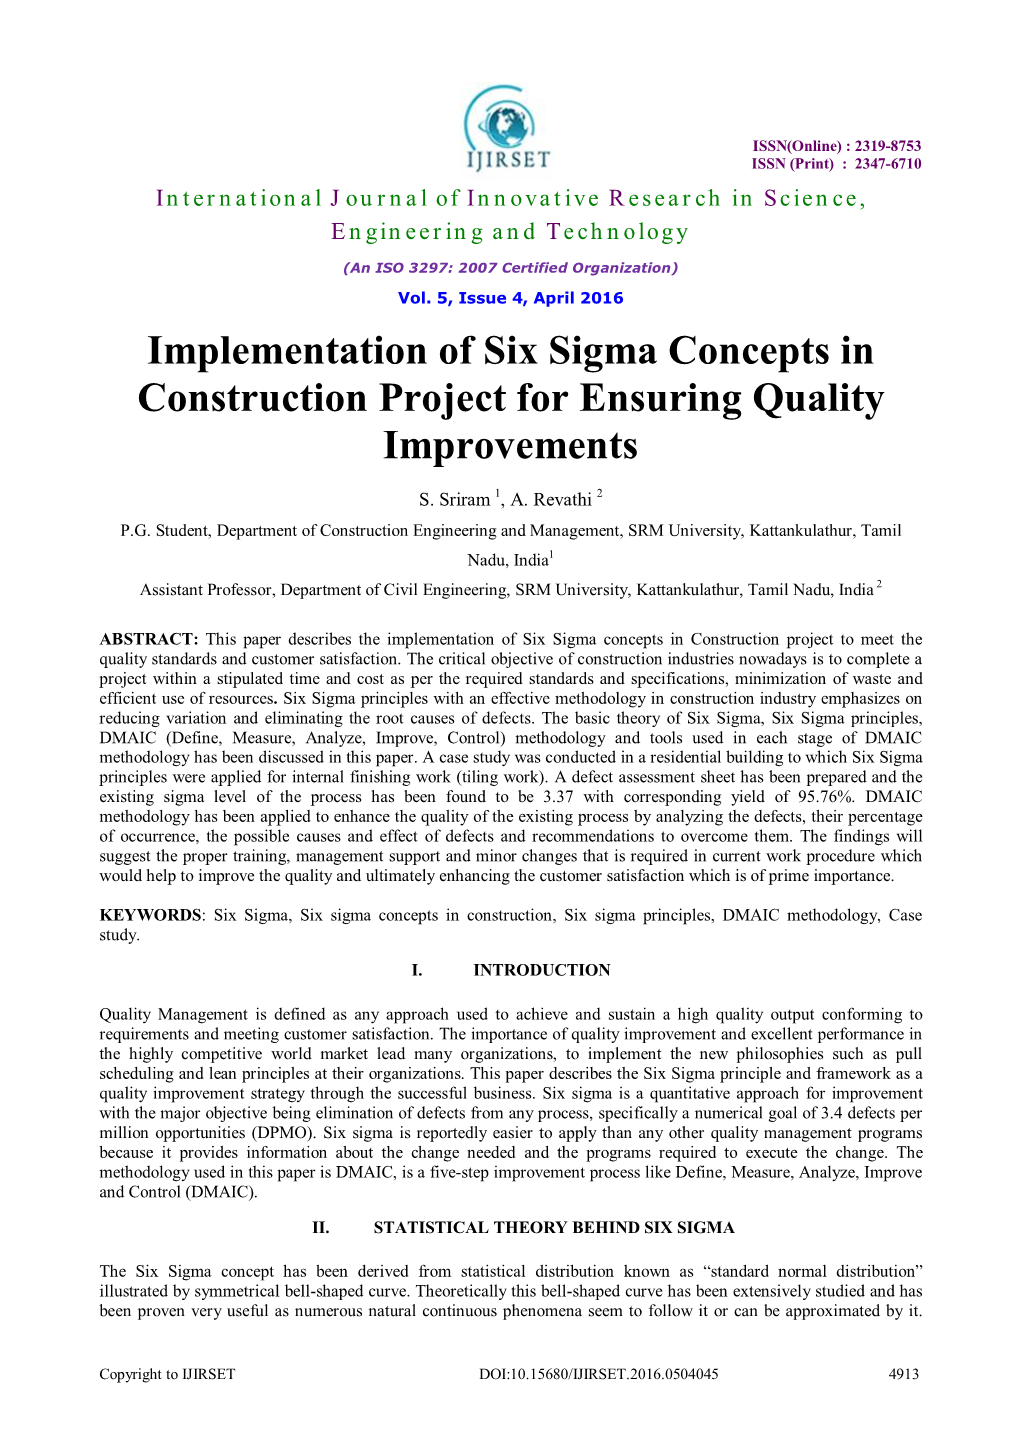 Implementation of Six Sigma Concepts in Construction Project for Ensuring Quality Improvements